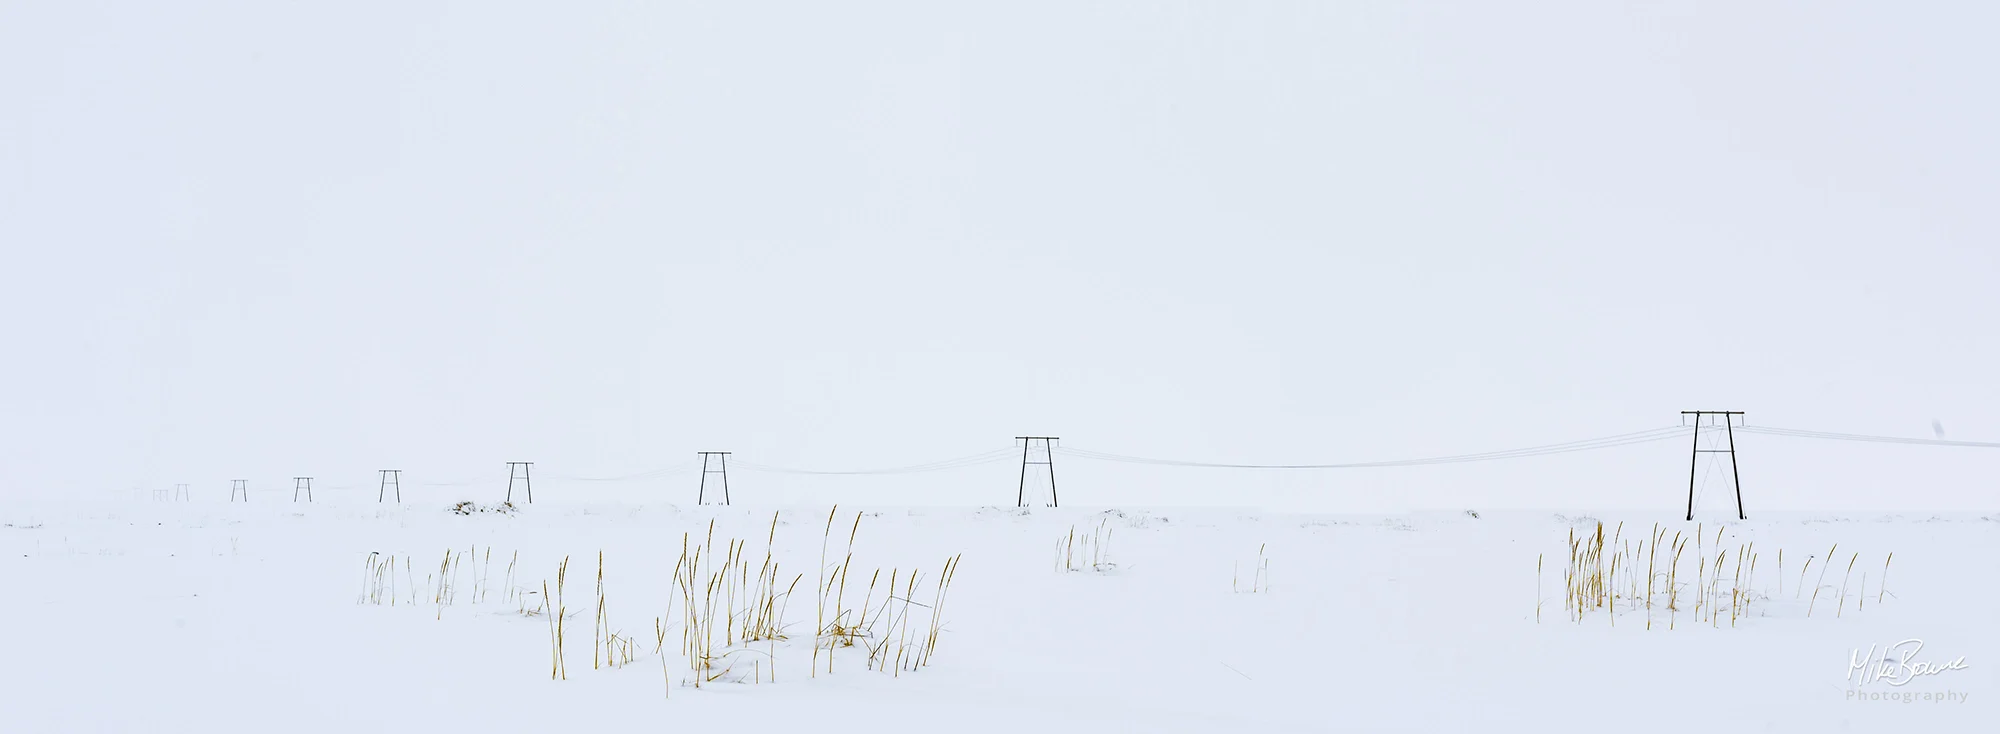 Power poles and tufts of yellow grass in a snow storm in Iceland